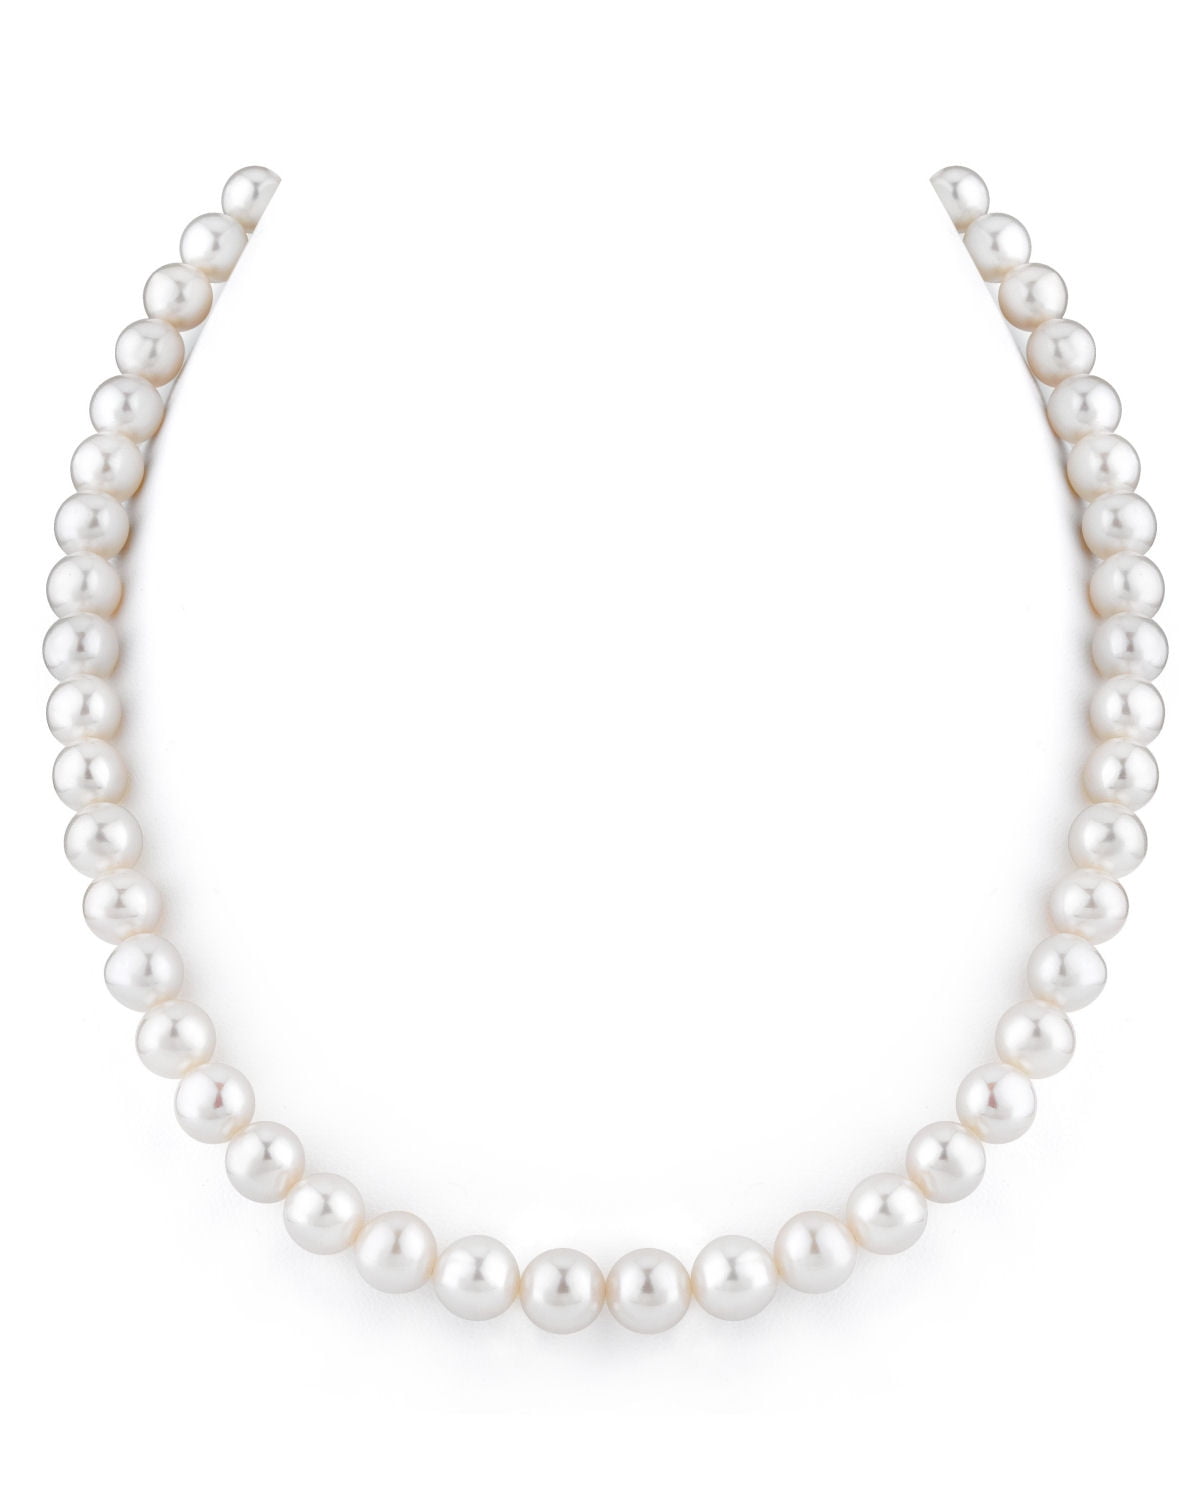 14K Gold 8-9mm AAAA Quality Round White Freshwater Cultured Pearl Necklace  for Women in 18 Princess Length